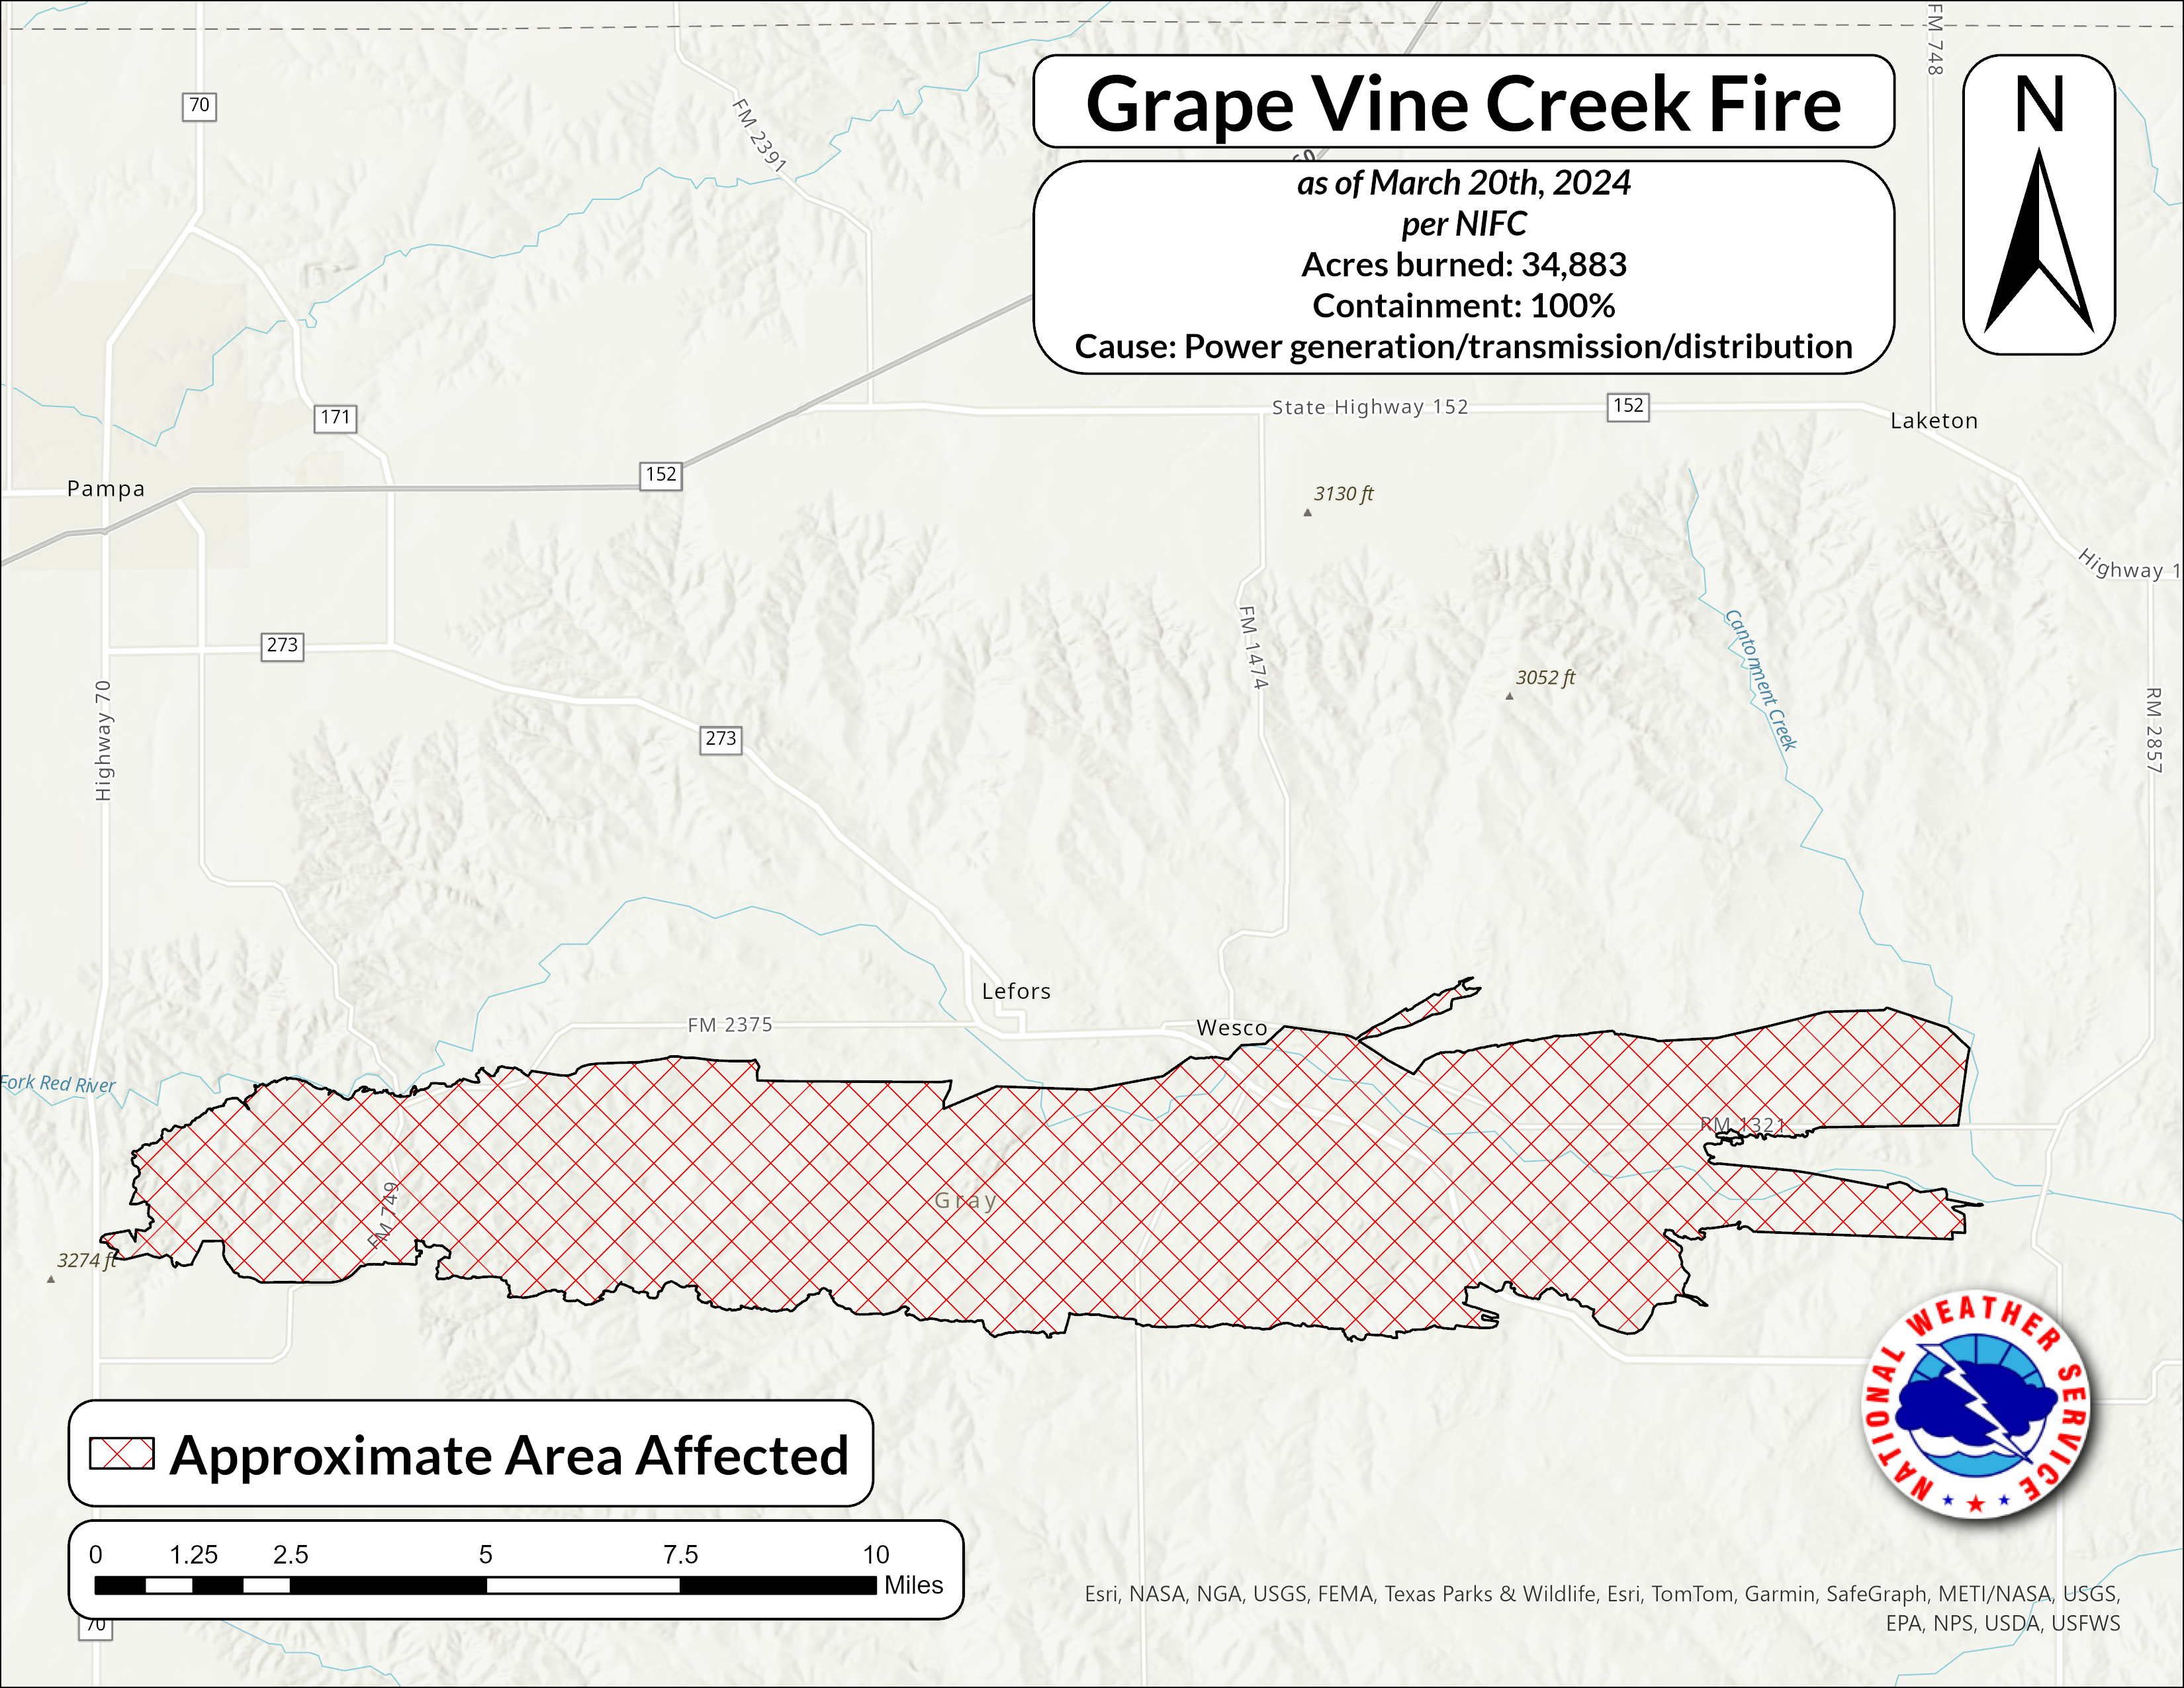 Map of the Grave Vine Creek fire showing information from the National Interagency Fire Center as of March 20th, 2024. The Grape Vine Creek Fire burned 34,883 acres, and is 100 percent contained. Per NIFC, the fire was initially started by power generation or transmission or distribution systems.